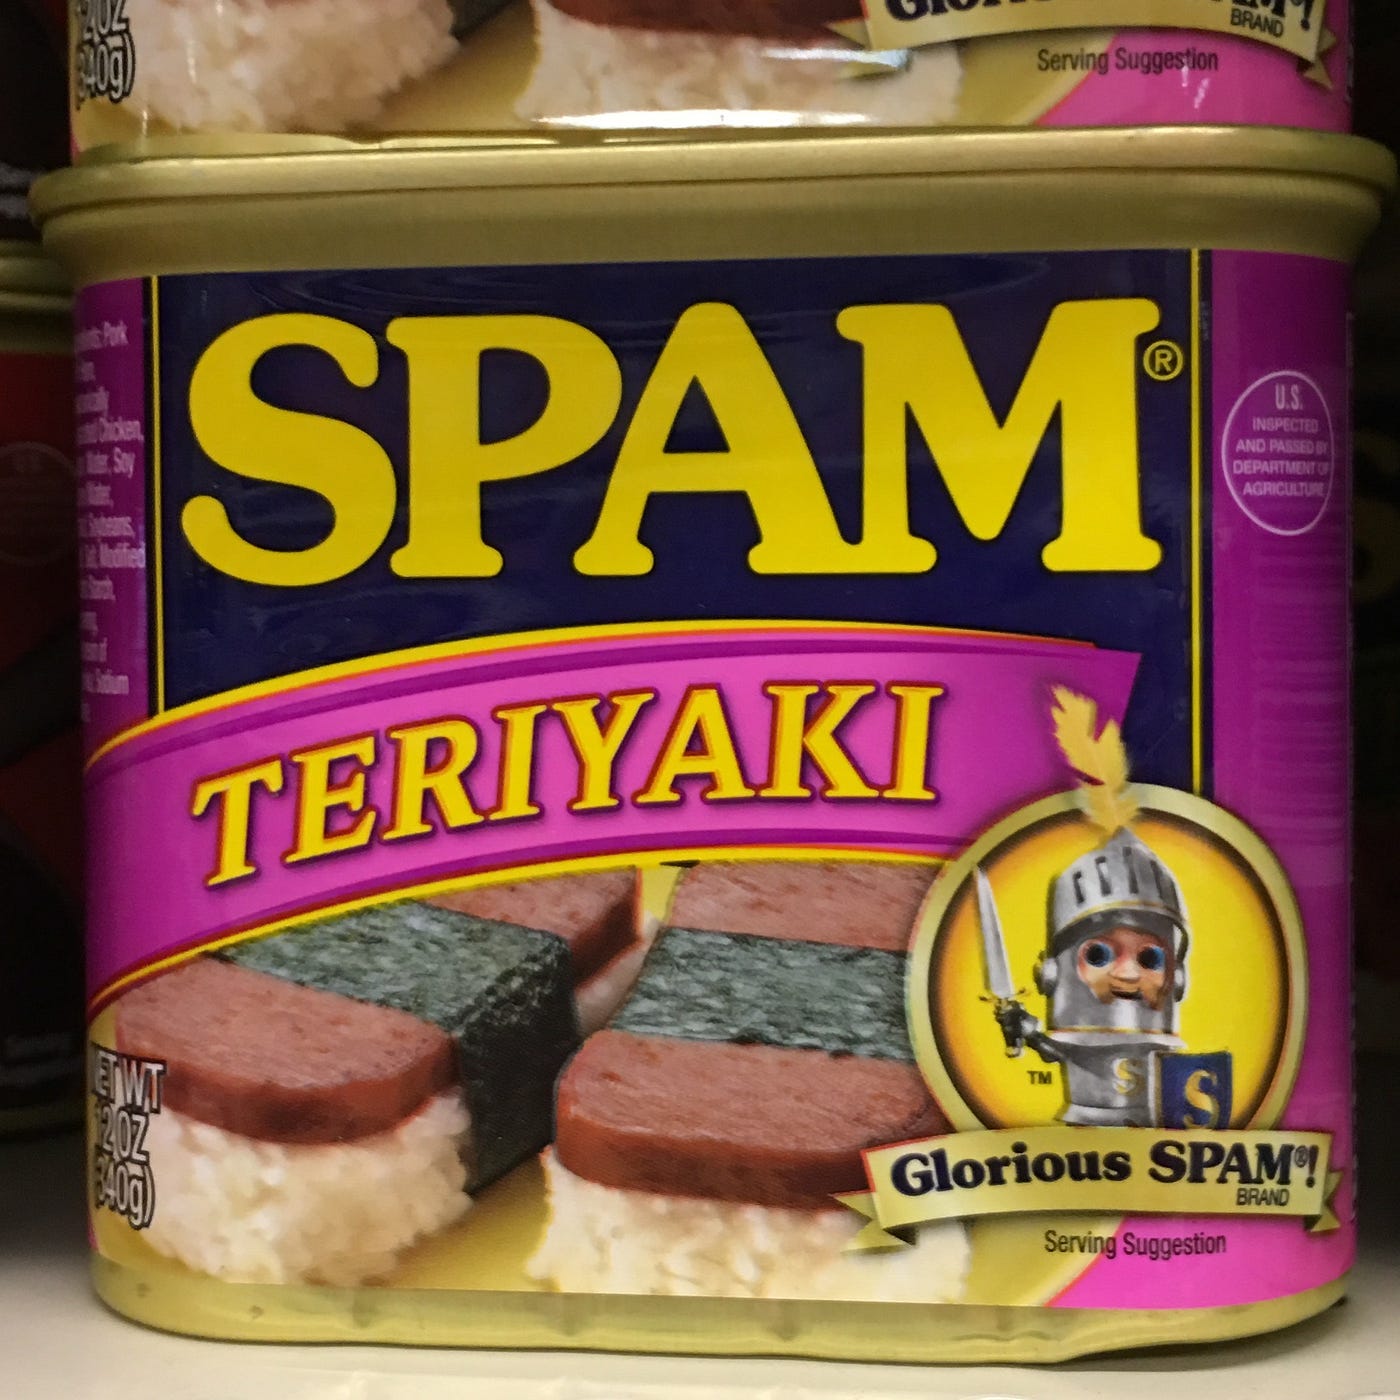 The Definitive Guide of Spam and Wine Pairings, by Ryan Ludman